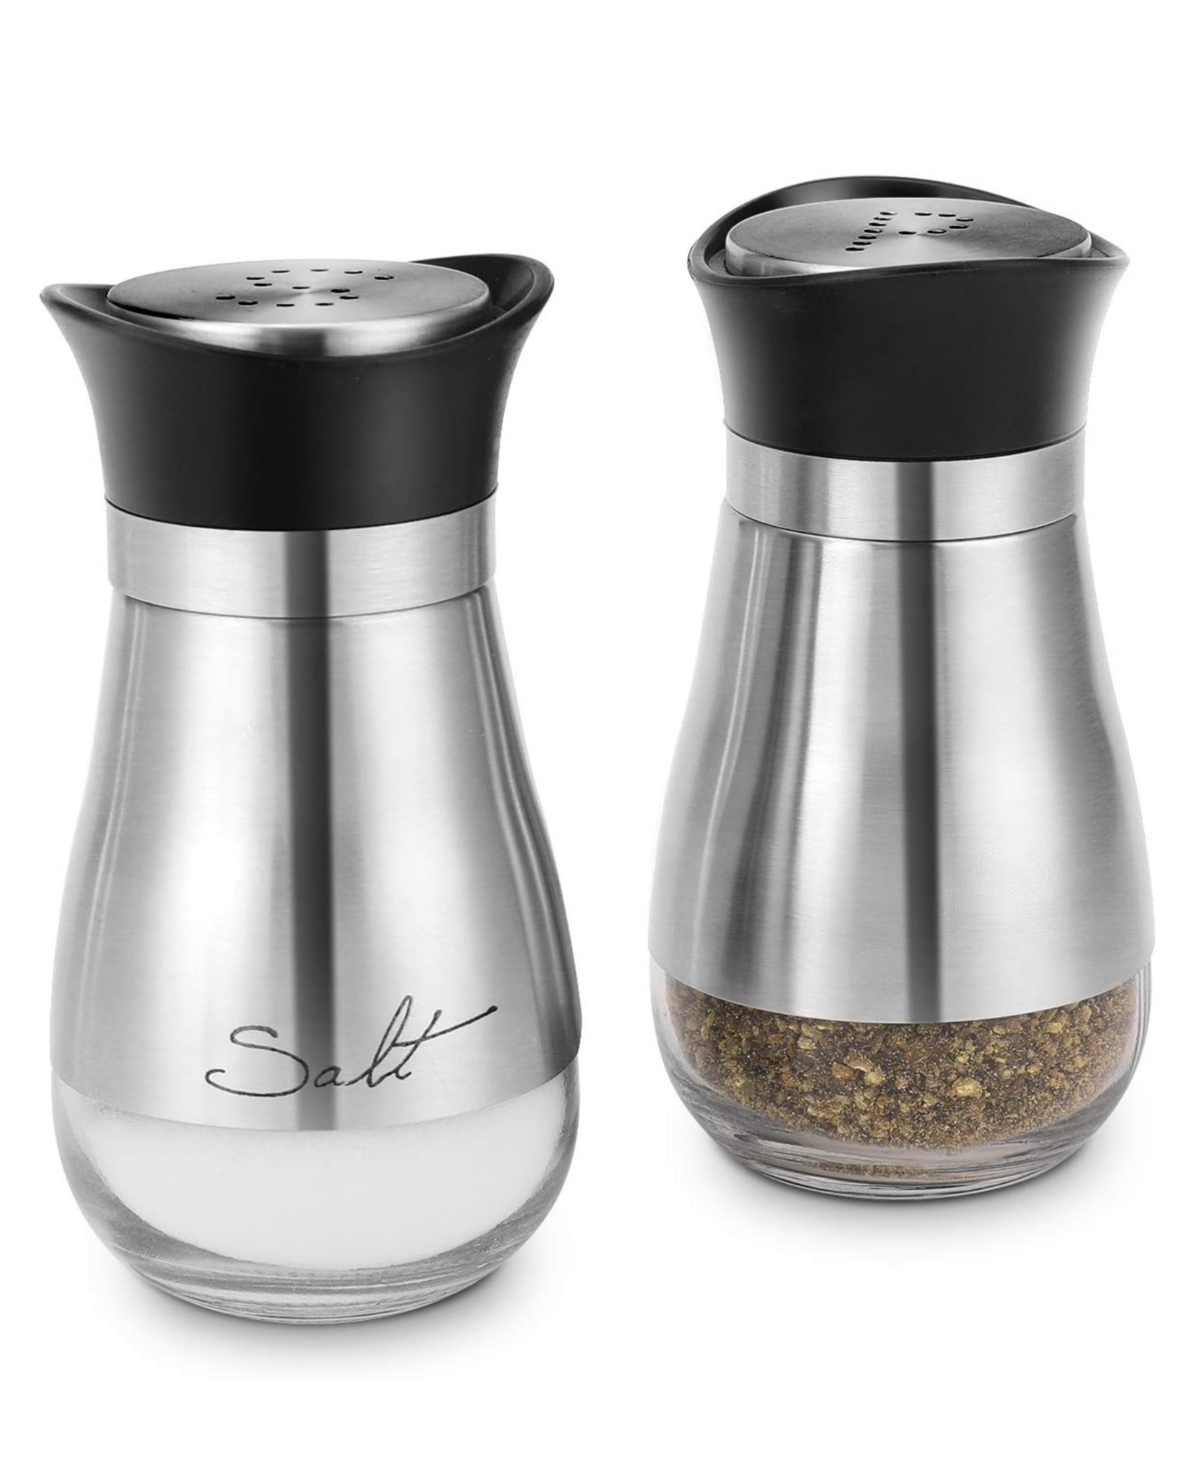 Circleware Cafe Contempo Silver And Glass 2 Pc Salt And Pepper